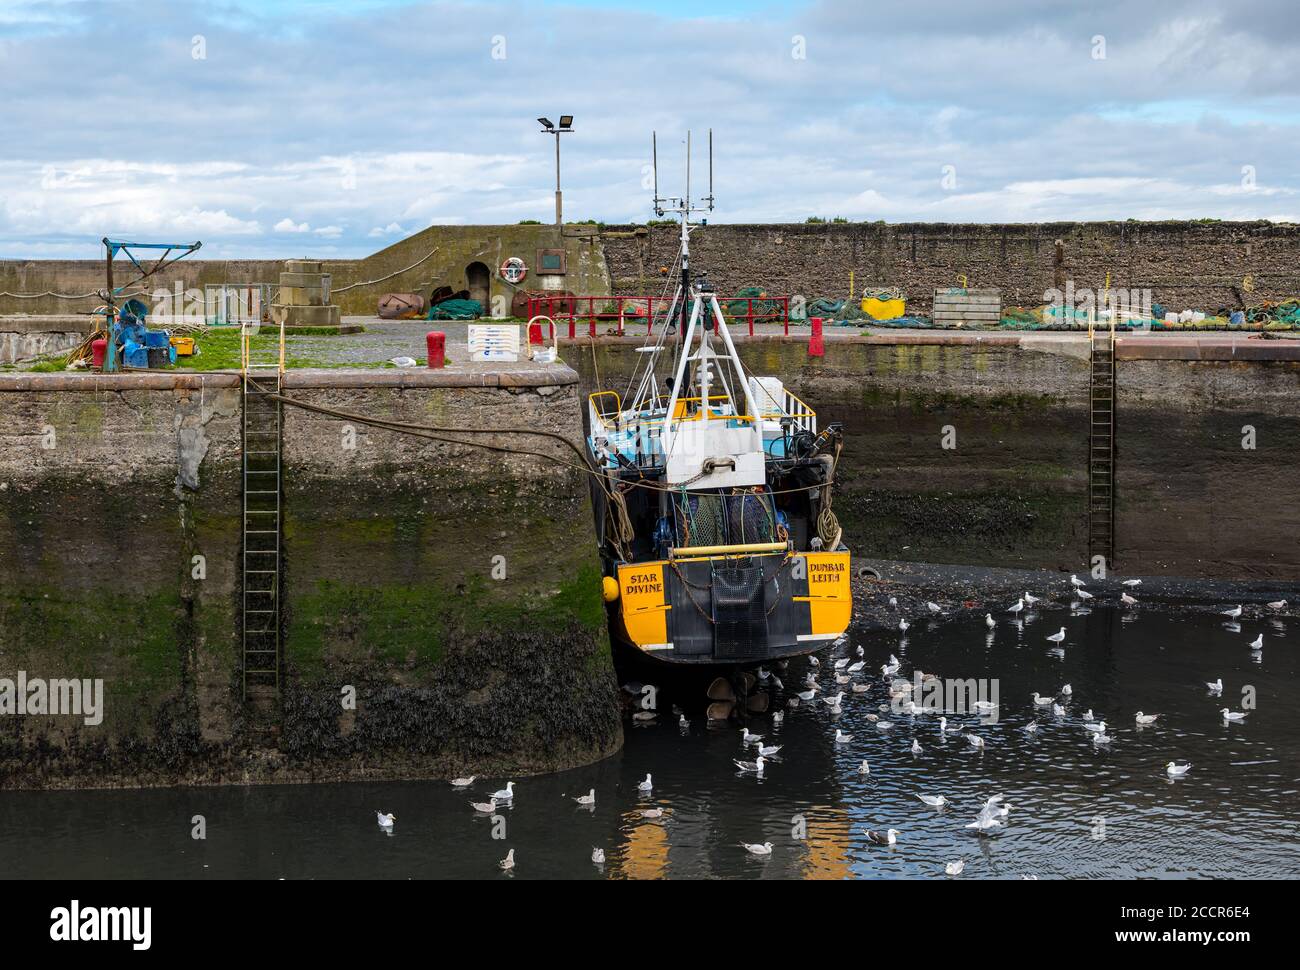 Cockenzie, East Lothian, Scotland, United Kingdom, 24th August 2020. UK Weather: The sky brightens in Port Seton harbour after a rainy morning with fishing boats aground in the mud at low tide Stock Photo